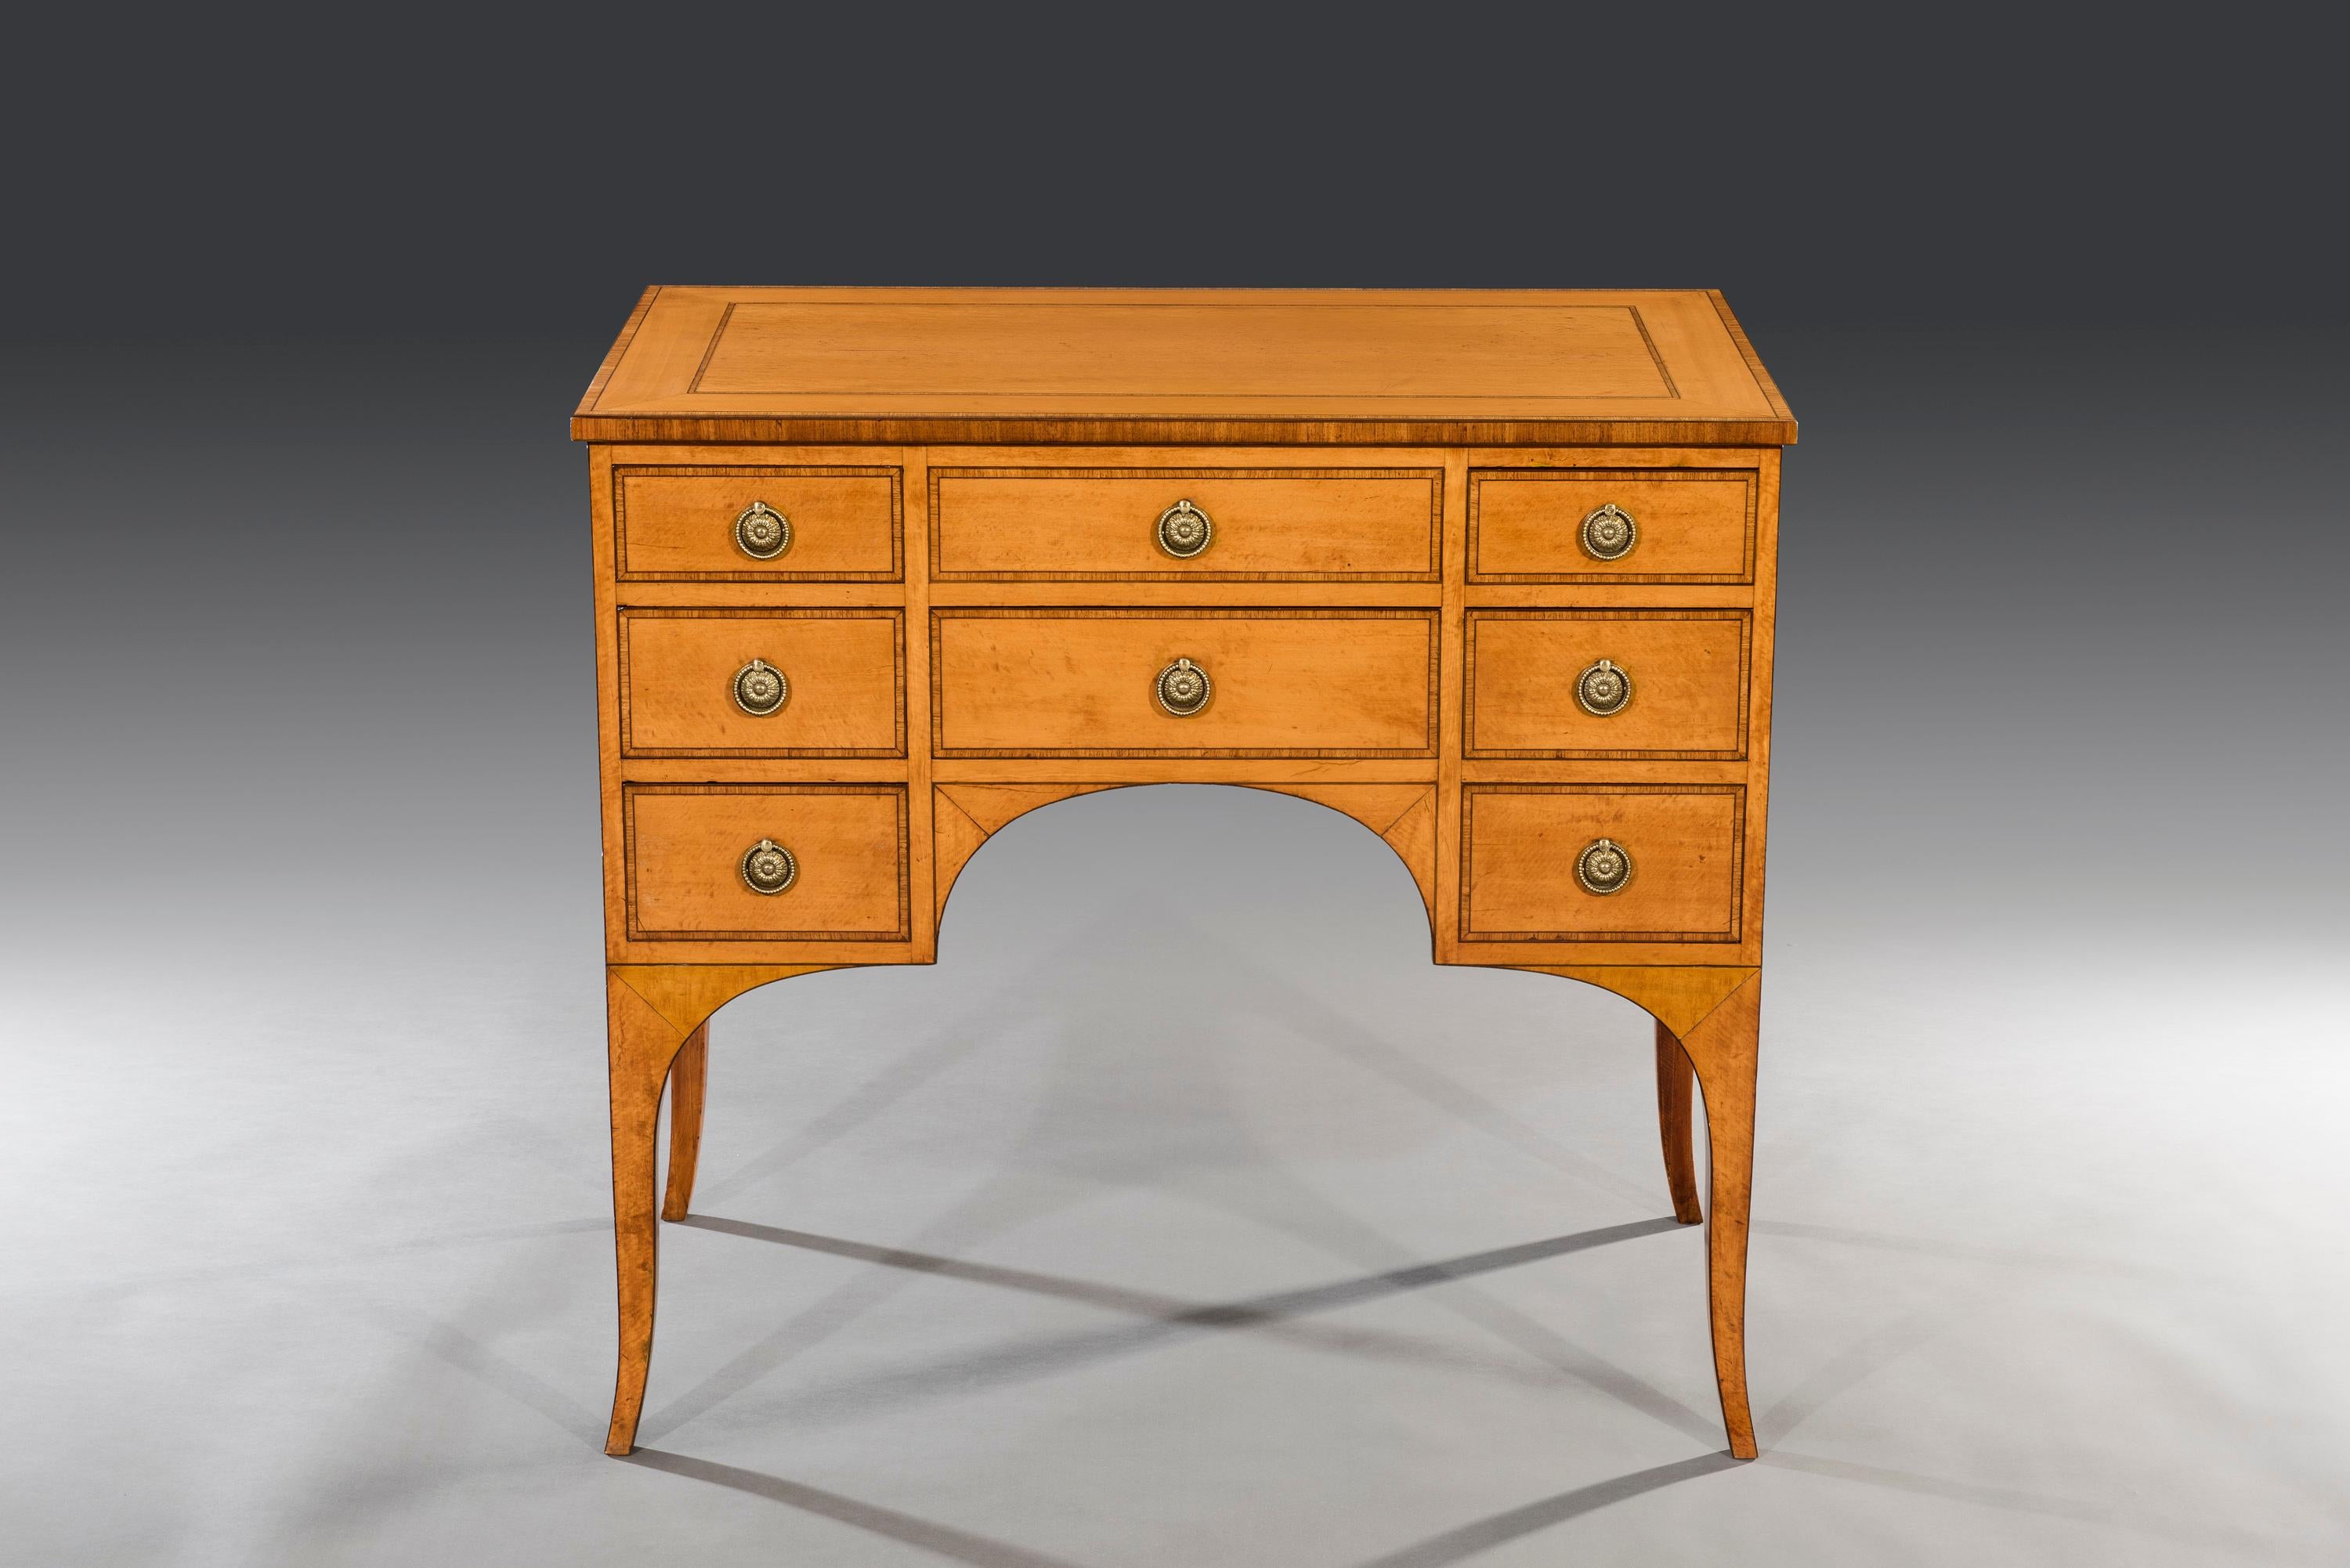 George III Sheraton Period West Indian Satinwood Inlaid Dressing Cabinet For Sale 1